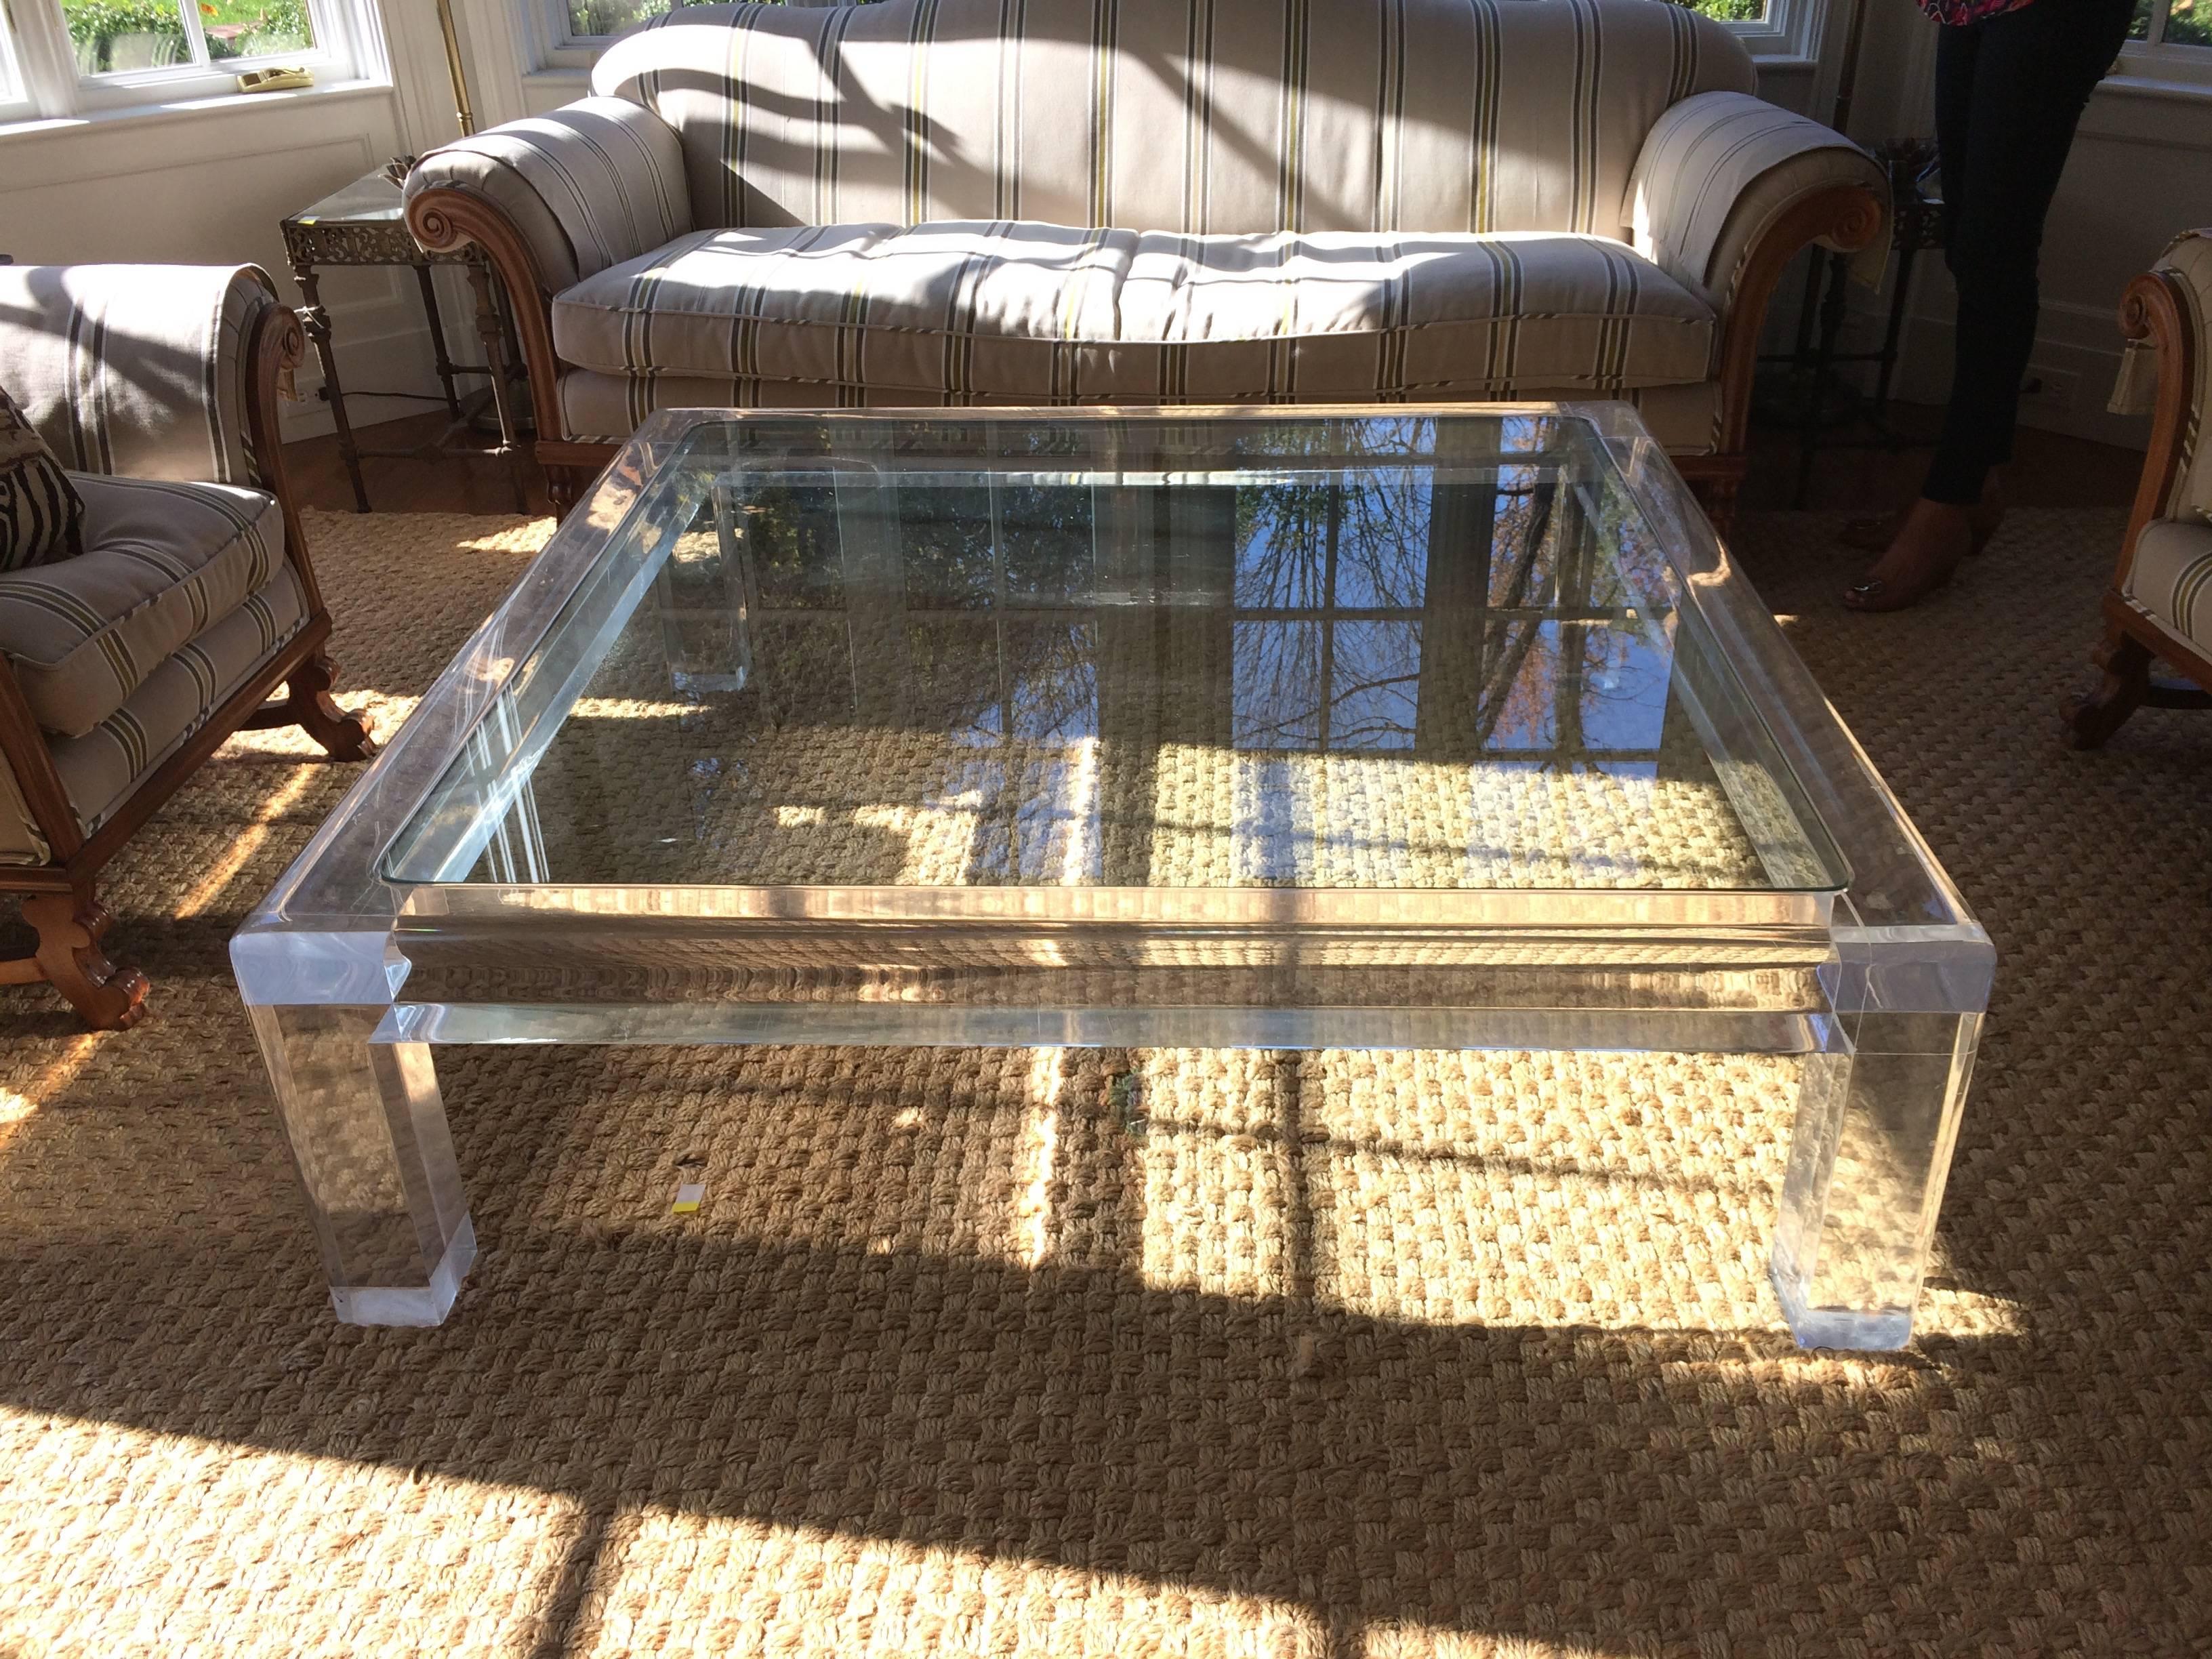 Gargantuan in scale, very impressive chunky Lucite coffee table from the 1970s.